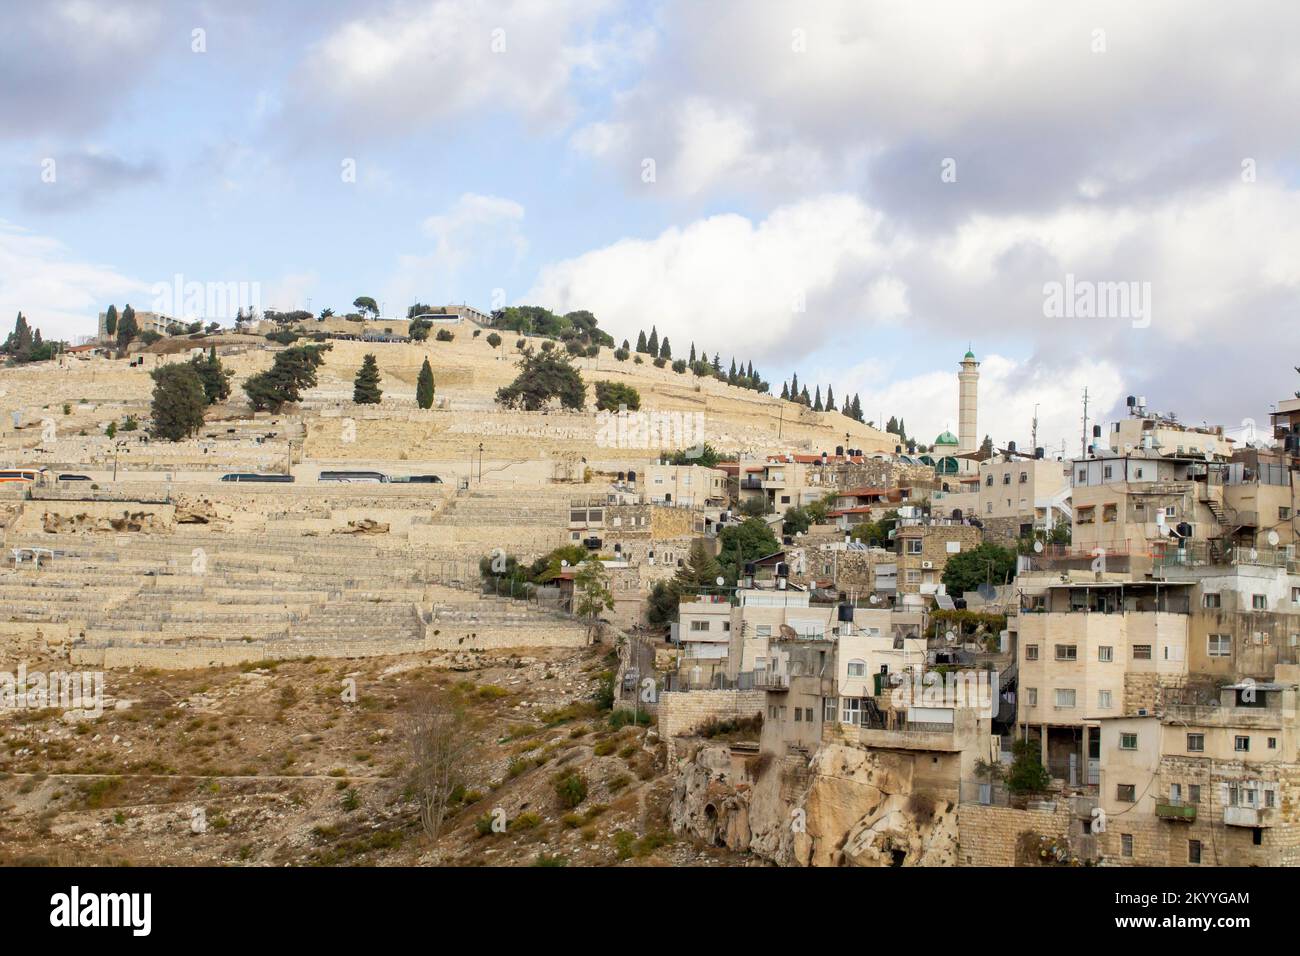 8 November 2022 A view of the tombs on the Mount of Olives together with the crowded local housing seen from the terrace near Hezekiah's Tunnel in Jer Stock Photo